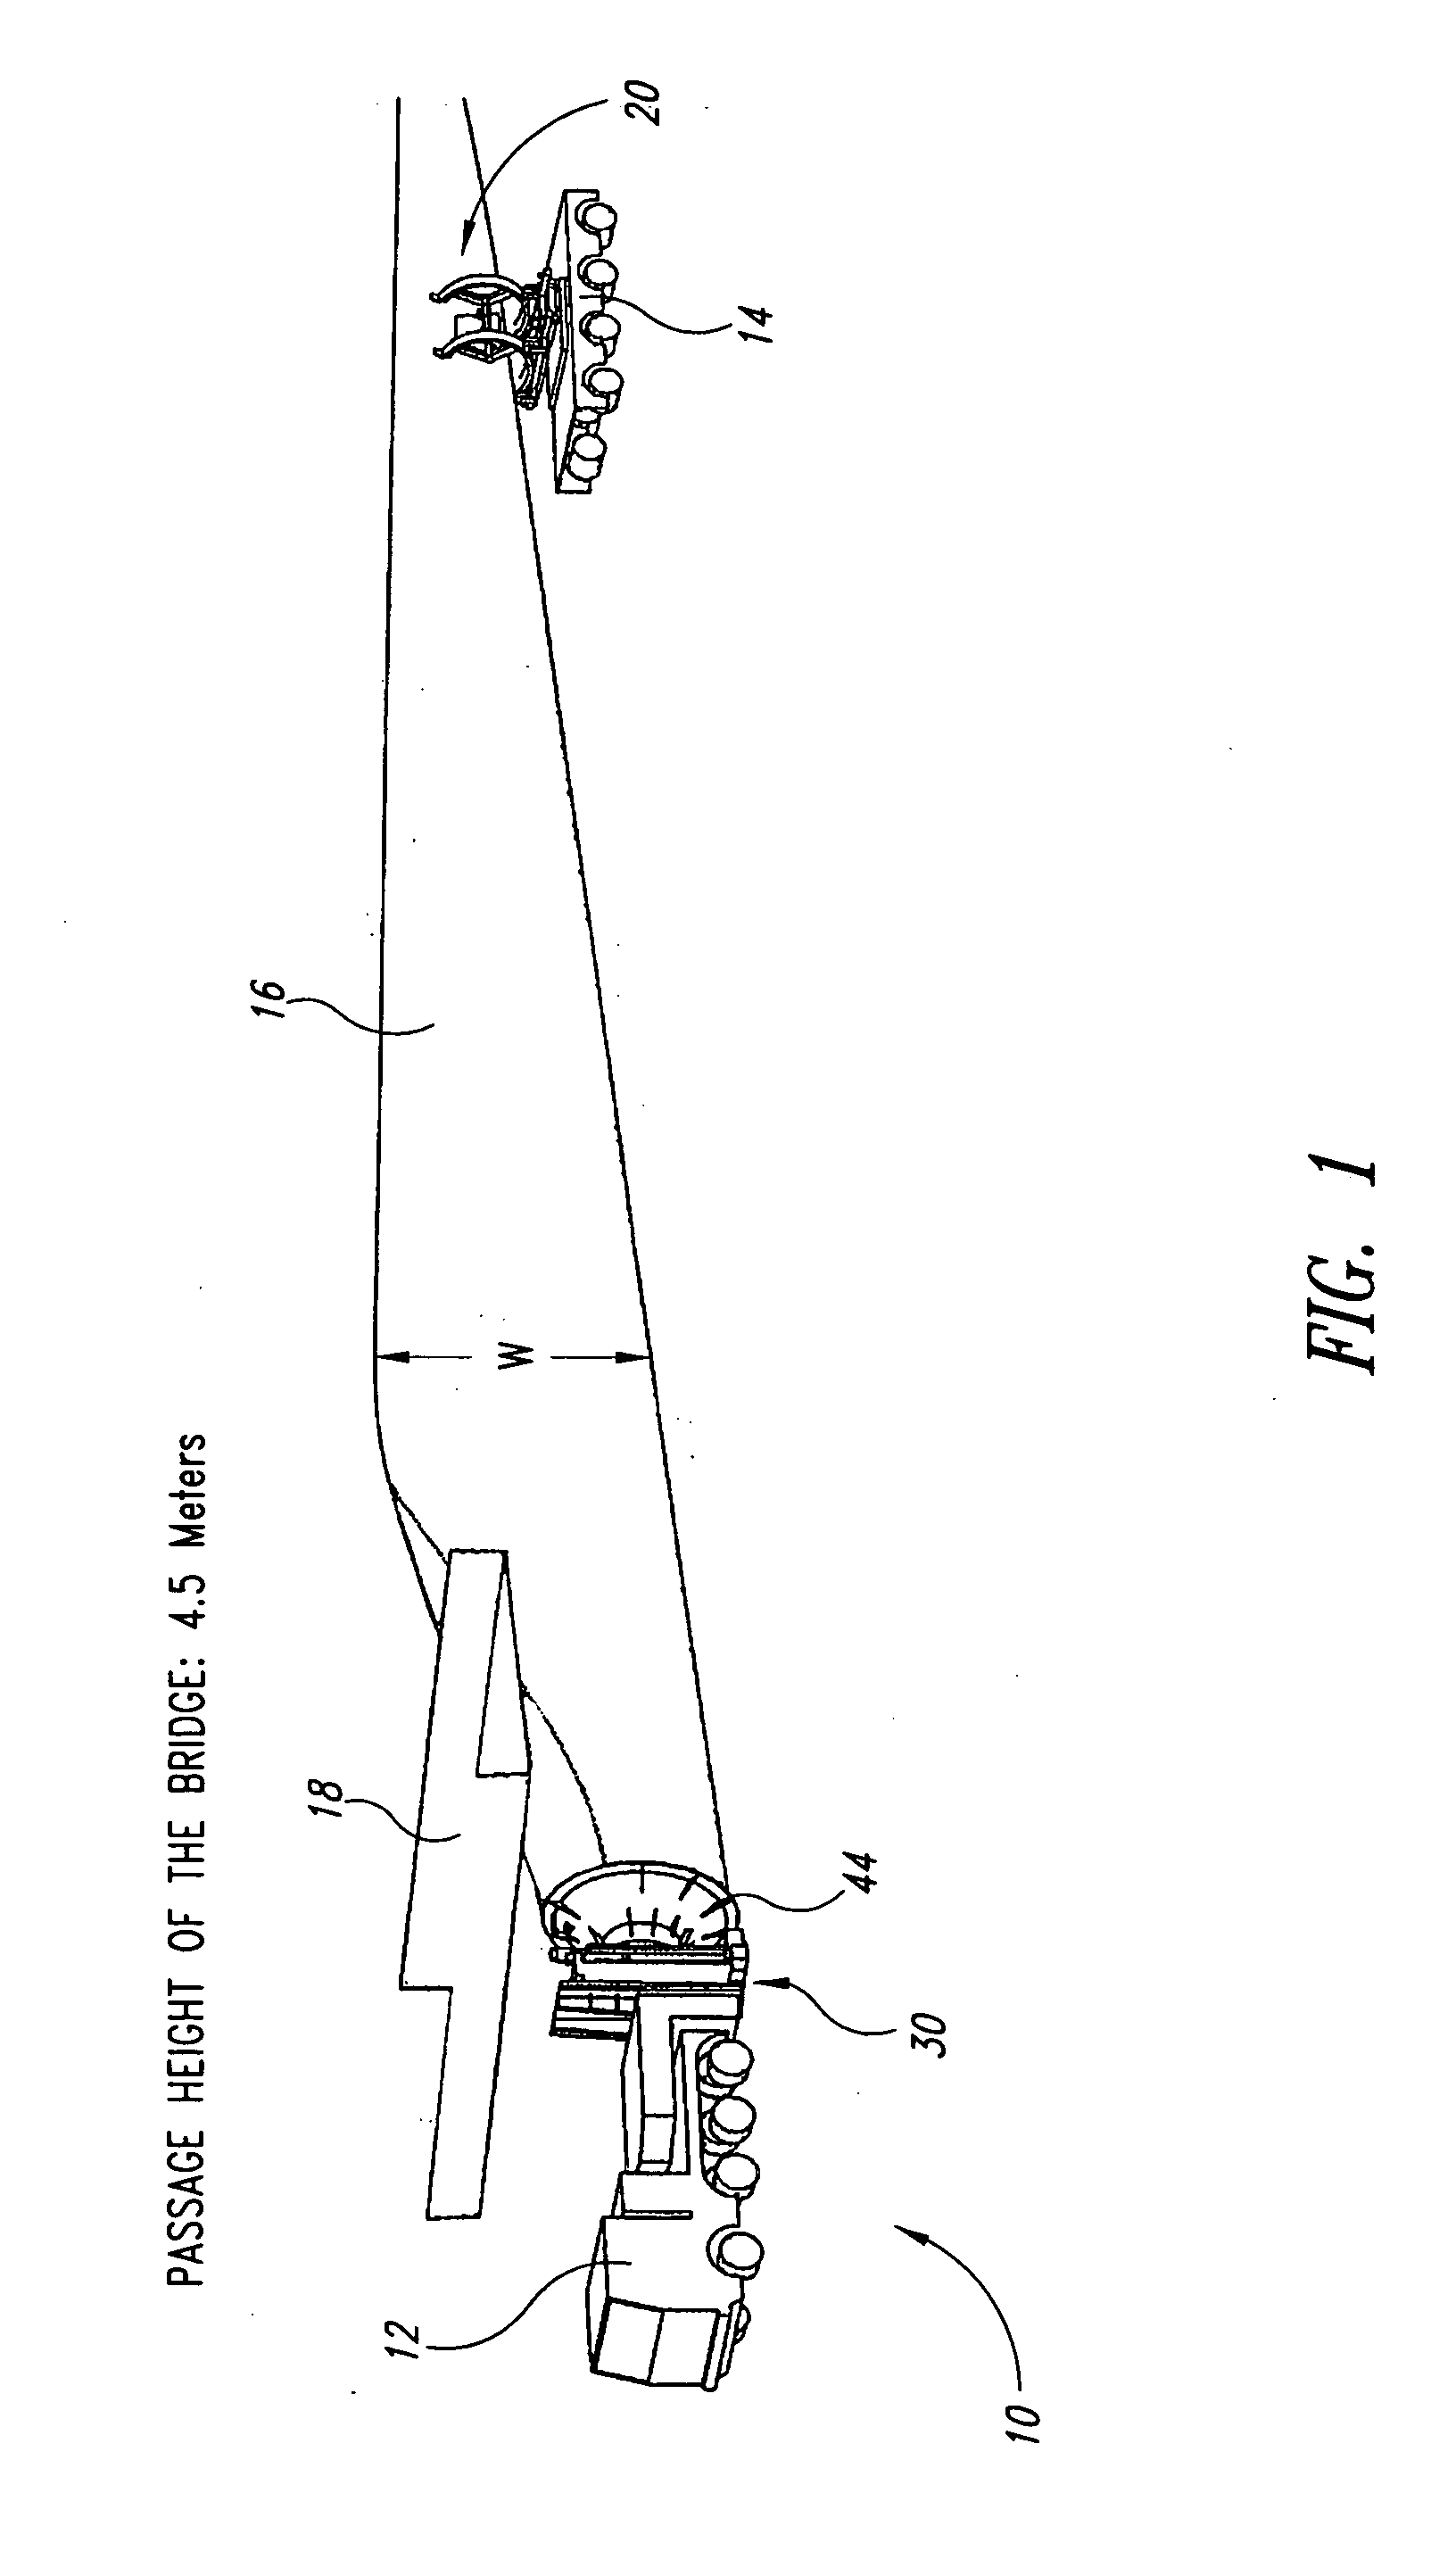 Transport vehicle for a rotor blade of a wind-energy turbine